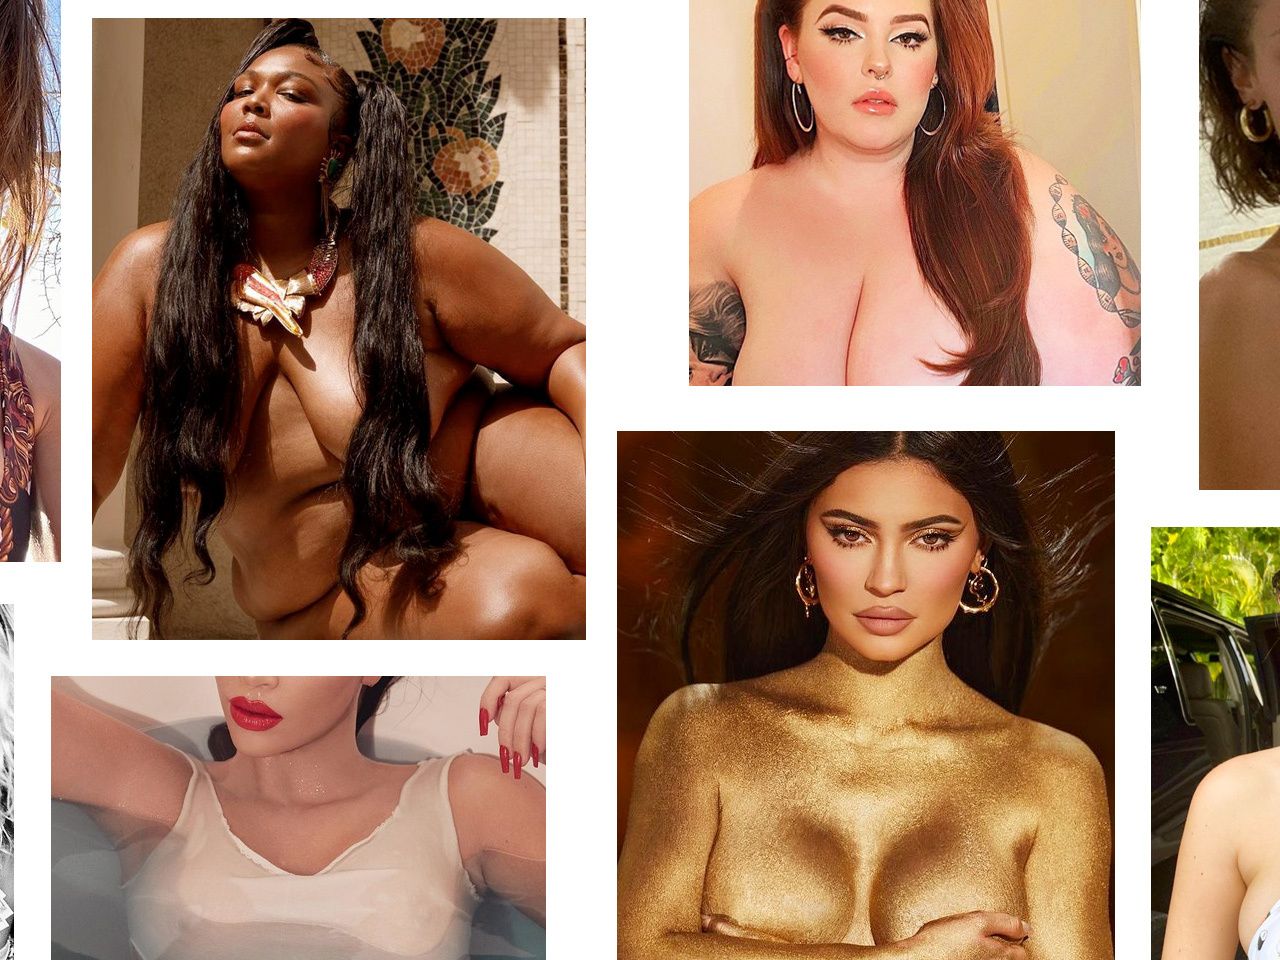 catherine torruella recommends sexy girls showing their boobs pic